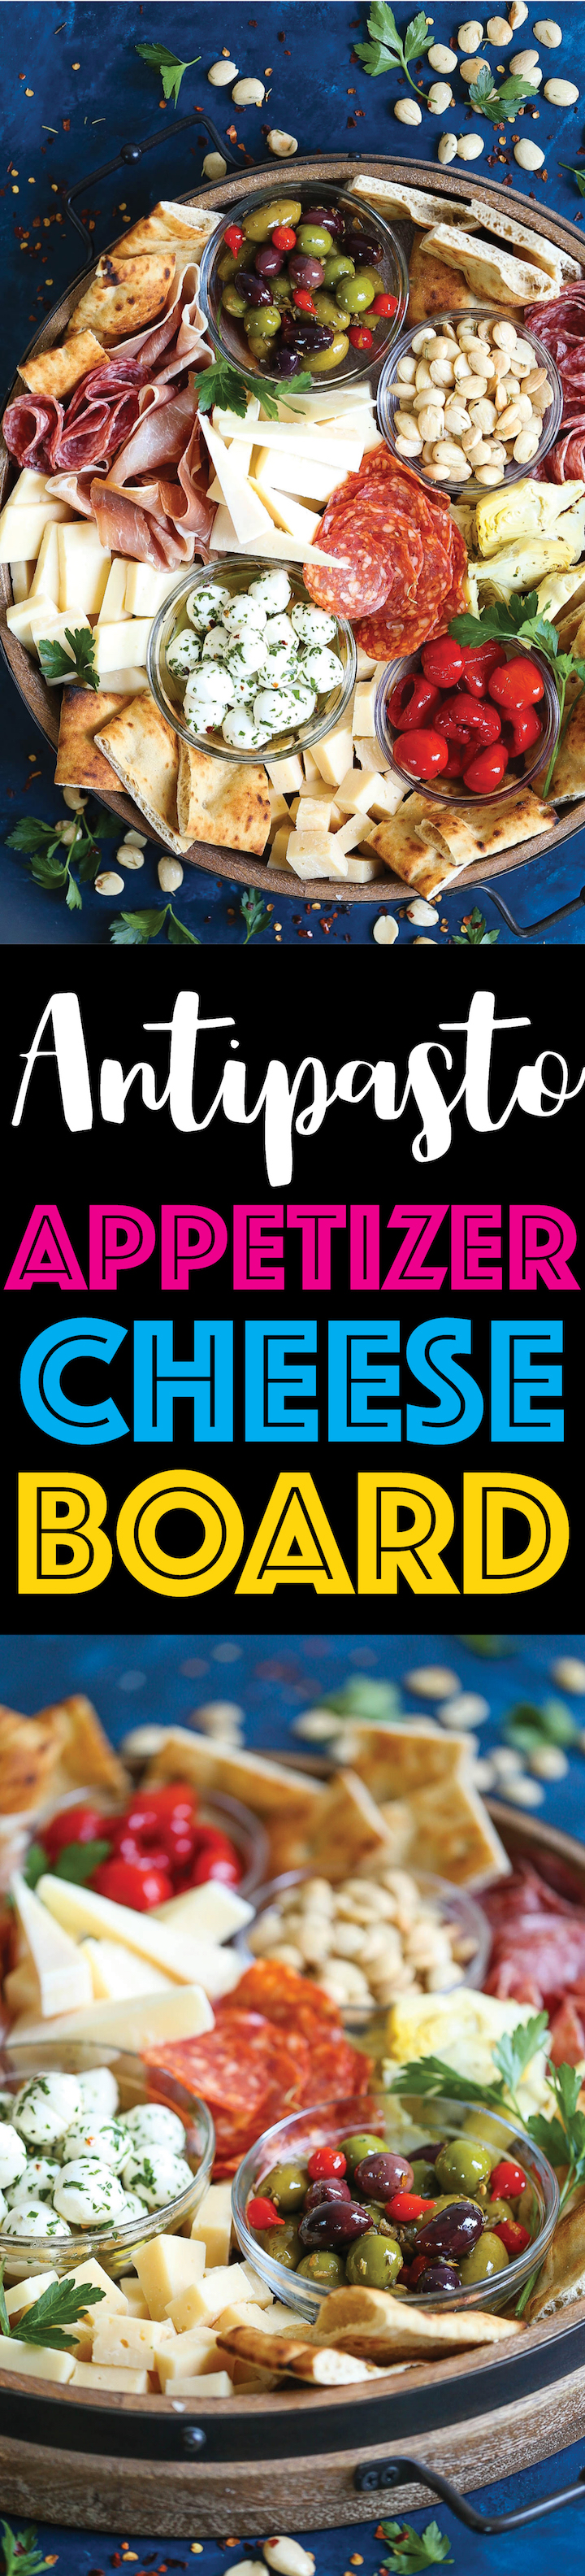 Antipasto Appetizer Cheese Board - Learn how to build the absolute PERFECT antipasto platter! It's unbelievably easy and sure to be a crowd-pleaser for all your guests! Served with cured meats, fresh cheeses, artichoke hearts, olives, nuts, peppers and focaccia!